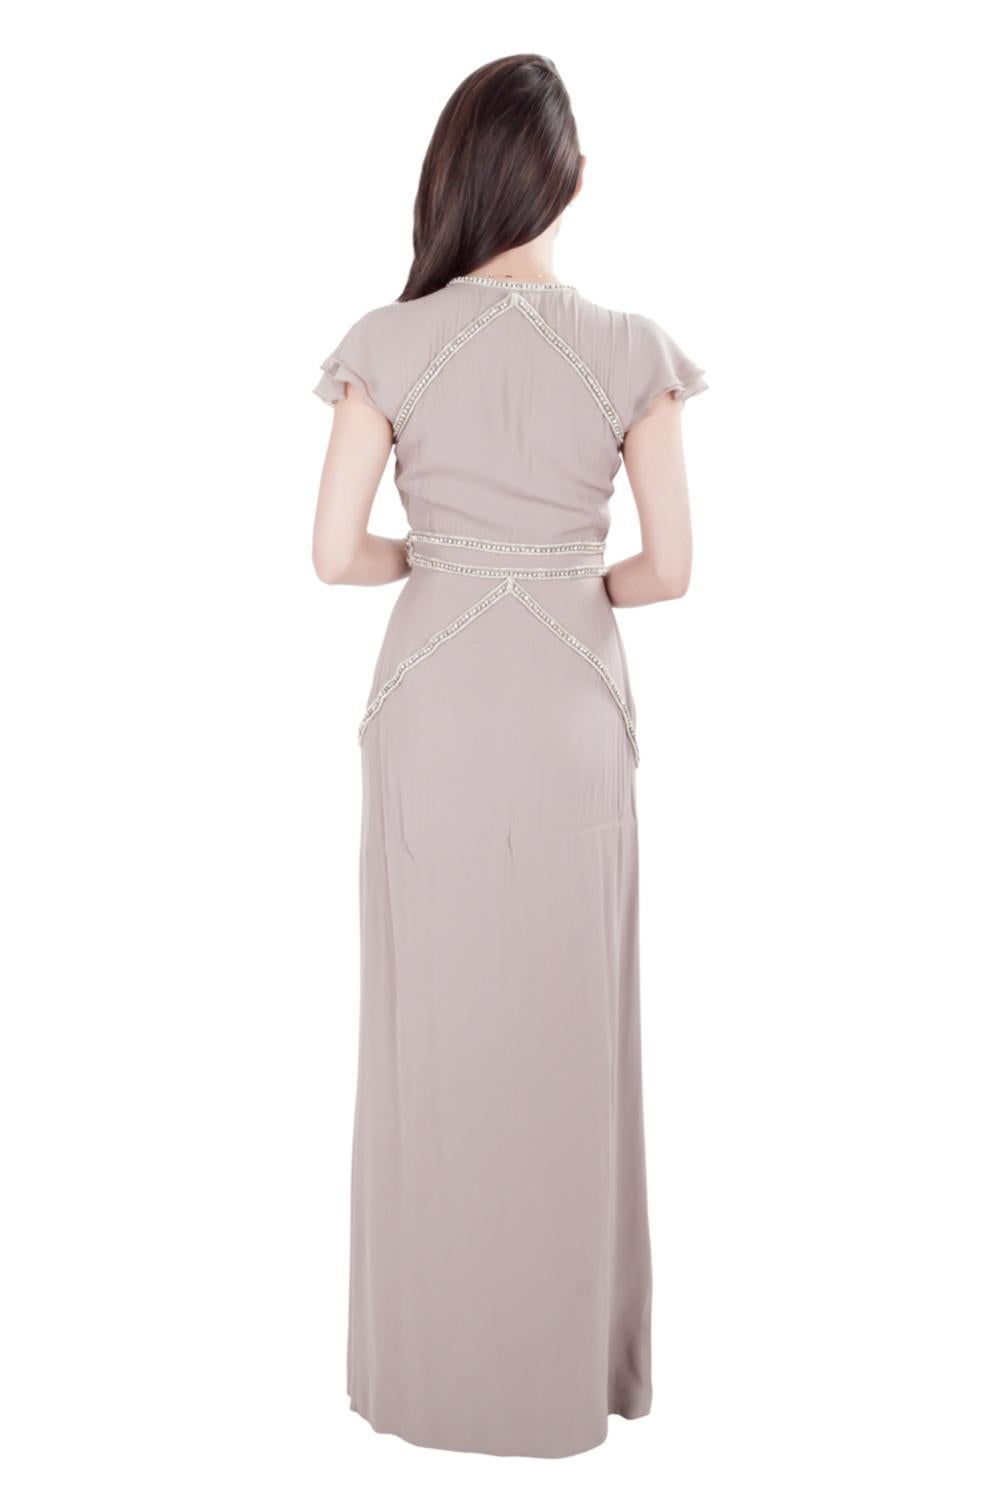 Viktor & Rolf design their elegant evening wears with subtle hints of glamor. This gown in an understated mauve shade features a plunging neckline and a flattering length. It is styled with short flutter sleeves and crystal embellishments at the